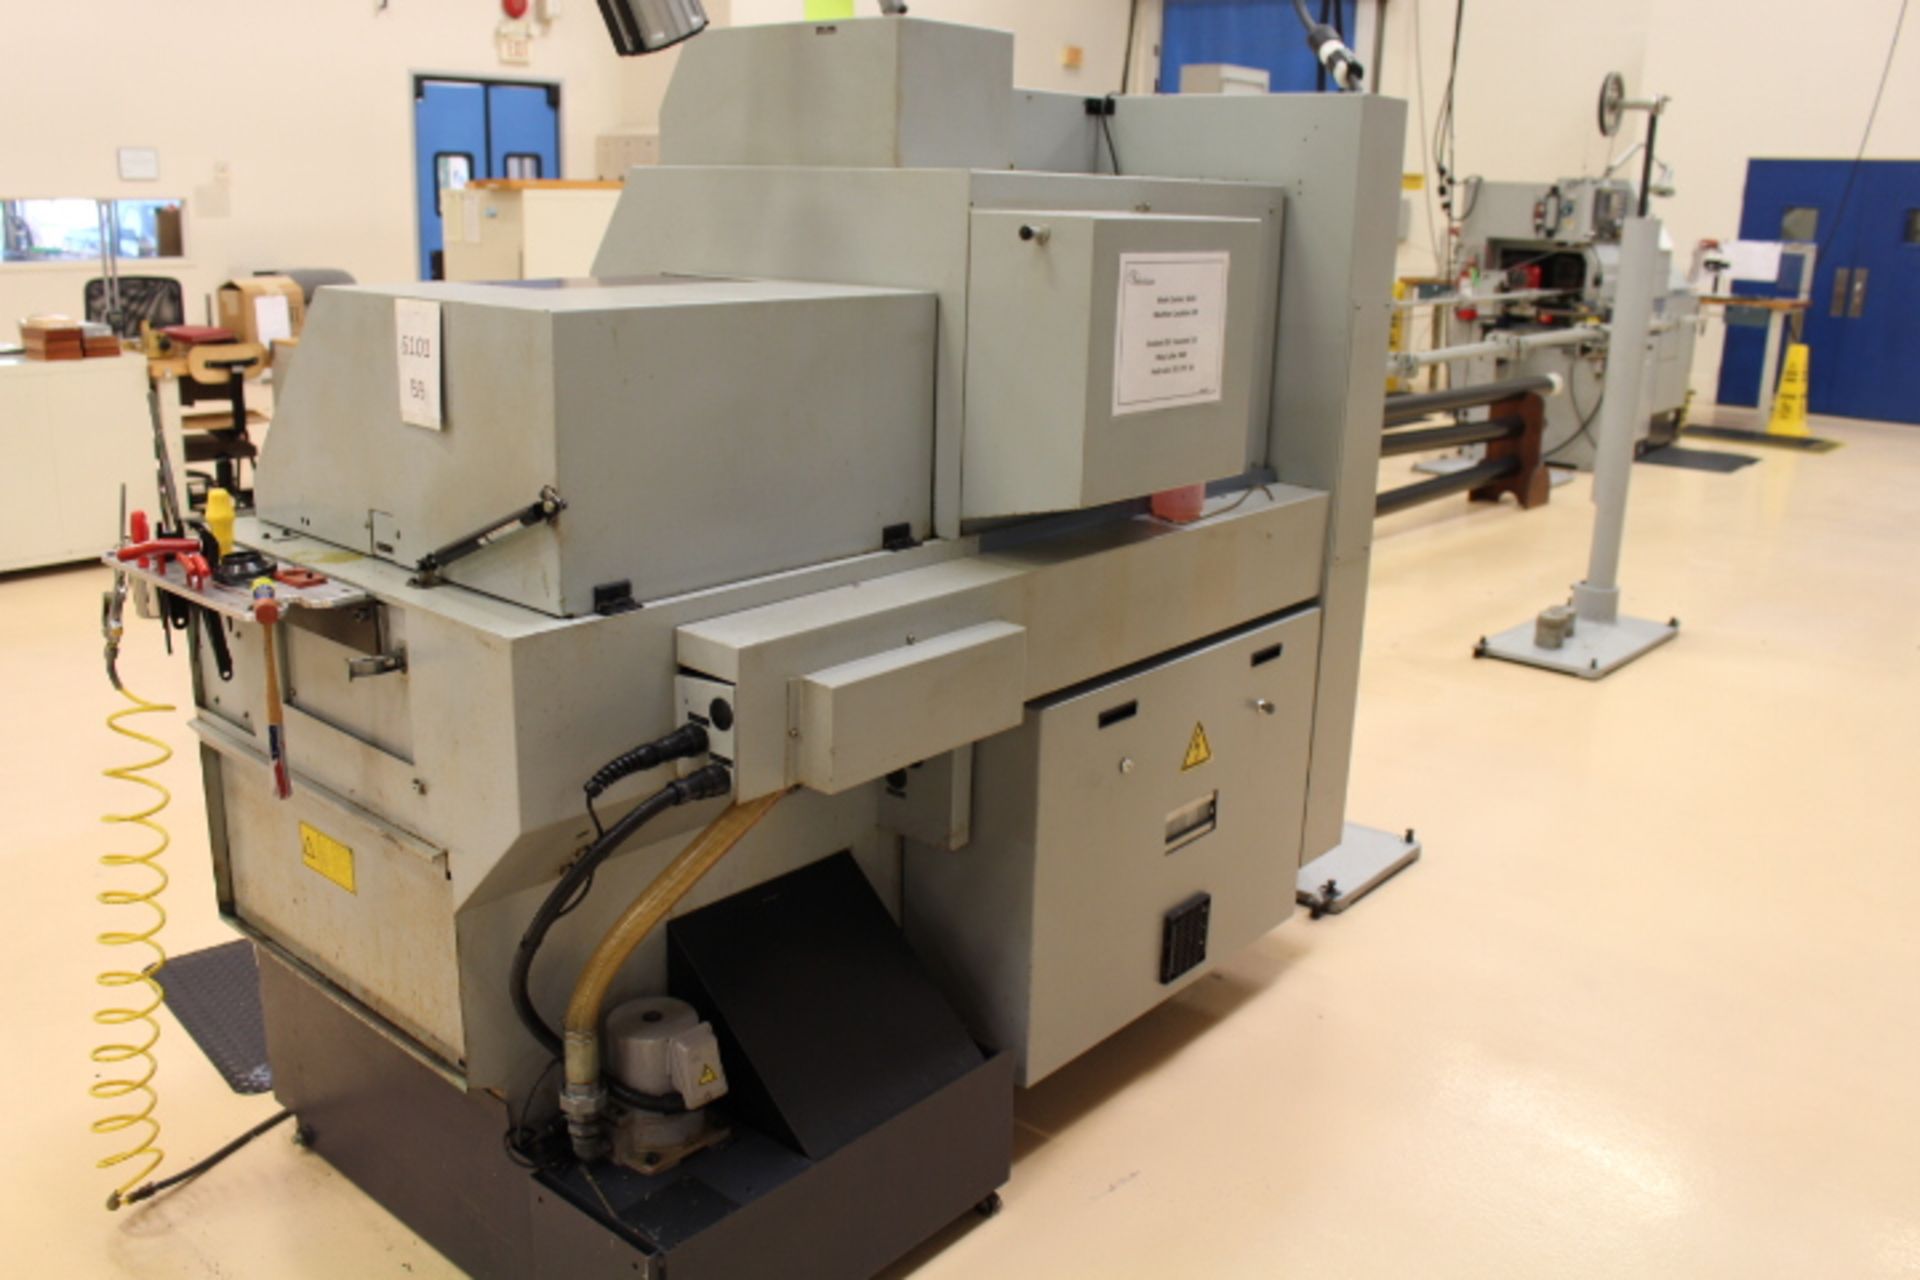 STAR SB-16 CNC 5-AXIS SWISS TYPE CNC LATHE, FANUC SERIES 18i-TB CONTROL, 4-SPINDLE ATTACHMENT, - Image 13 of 15